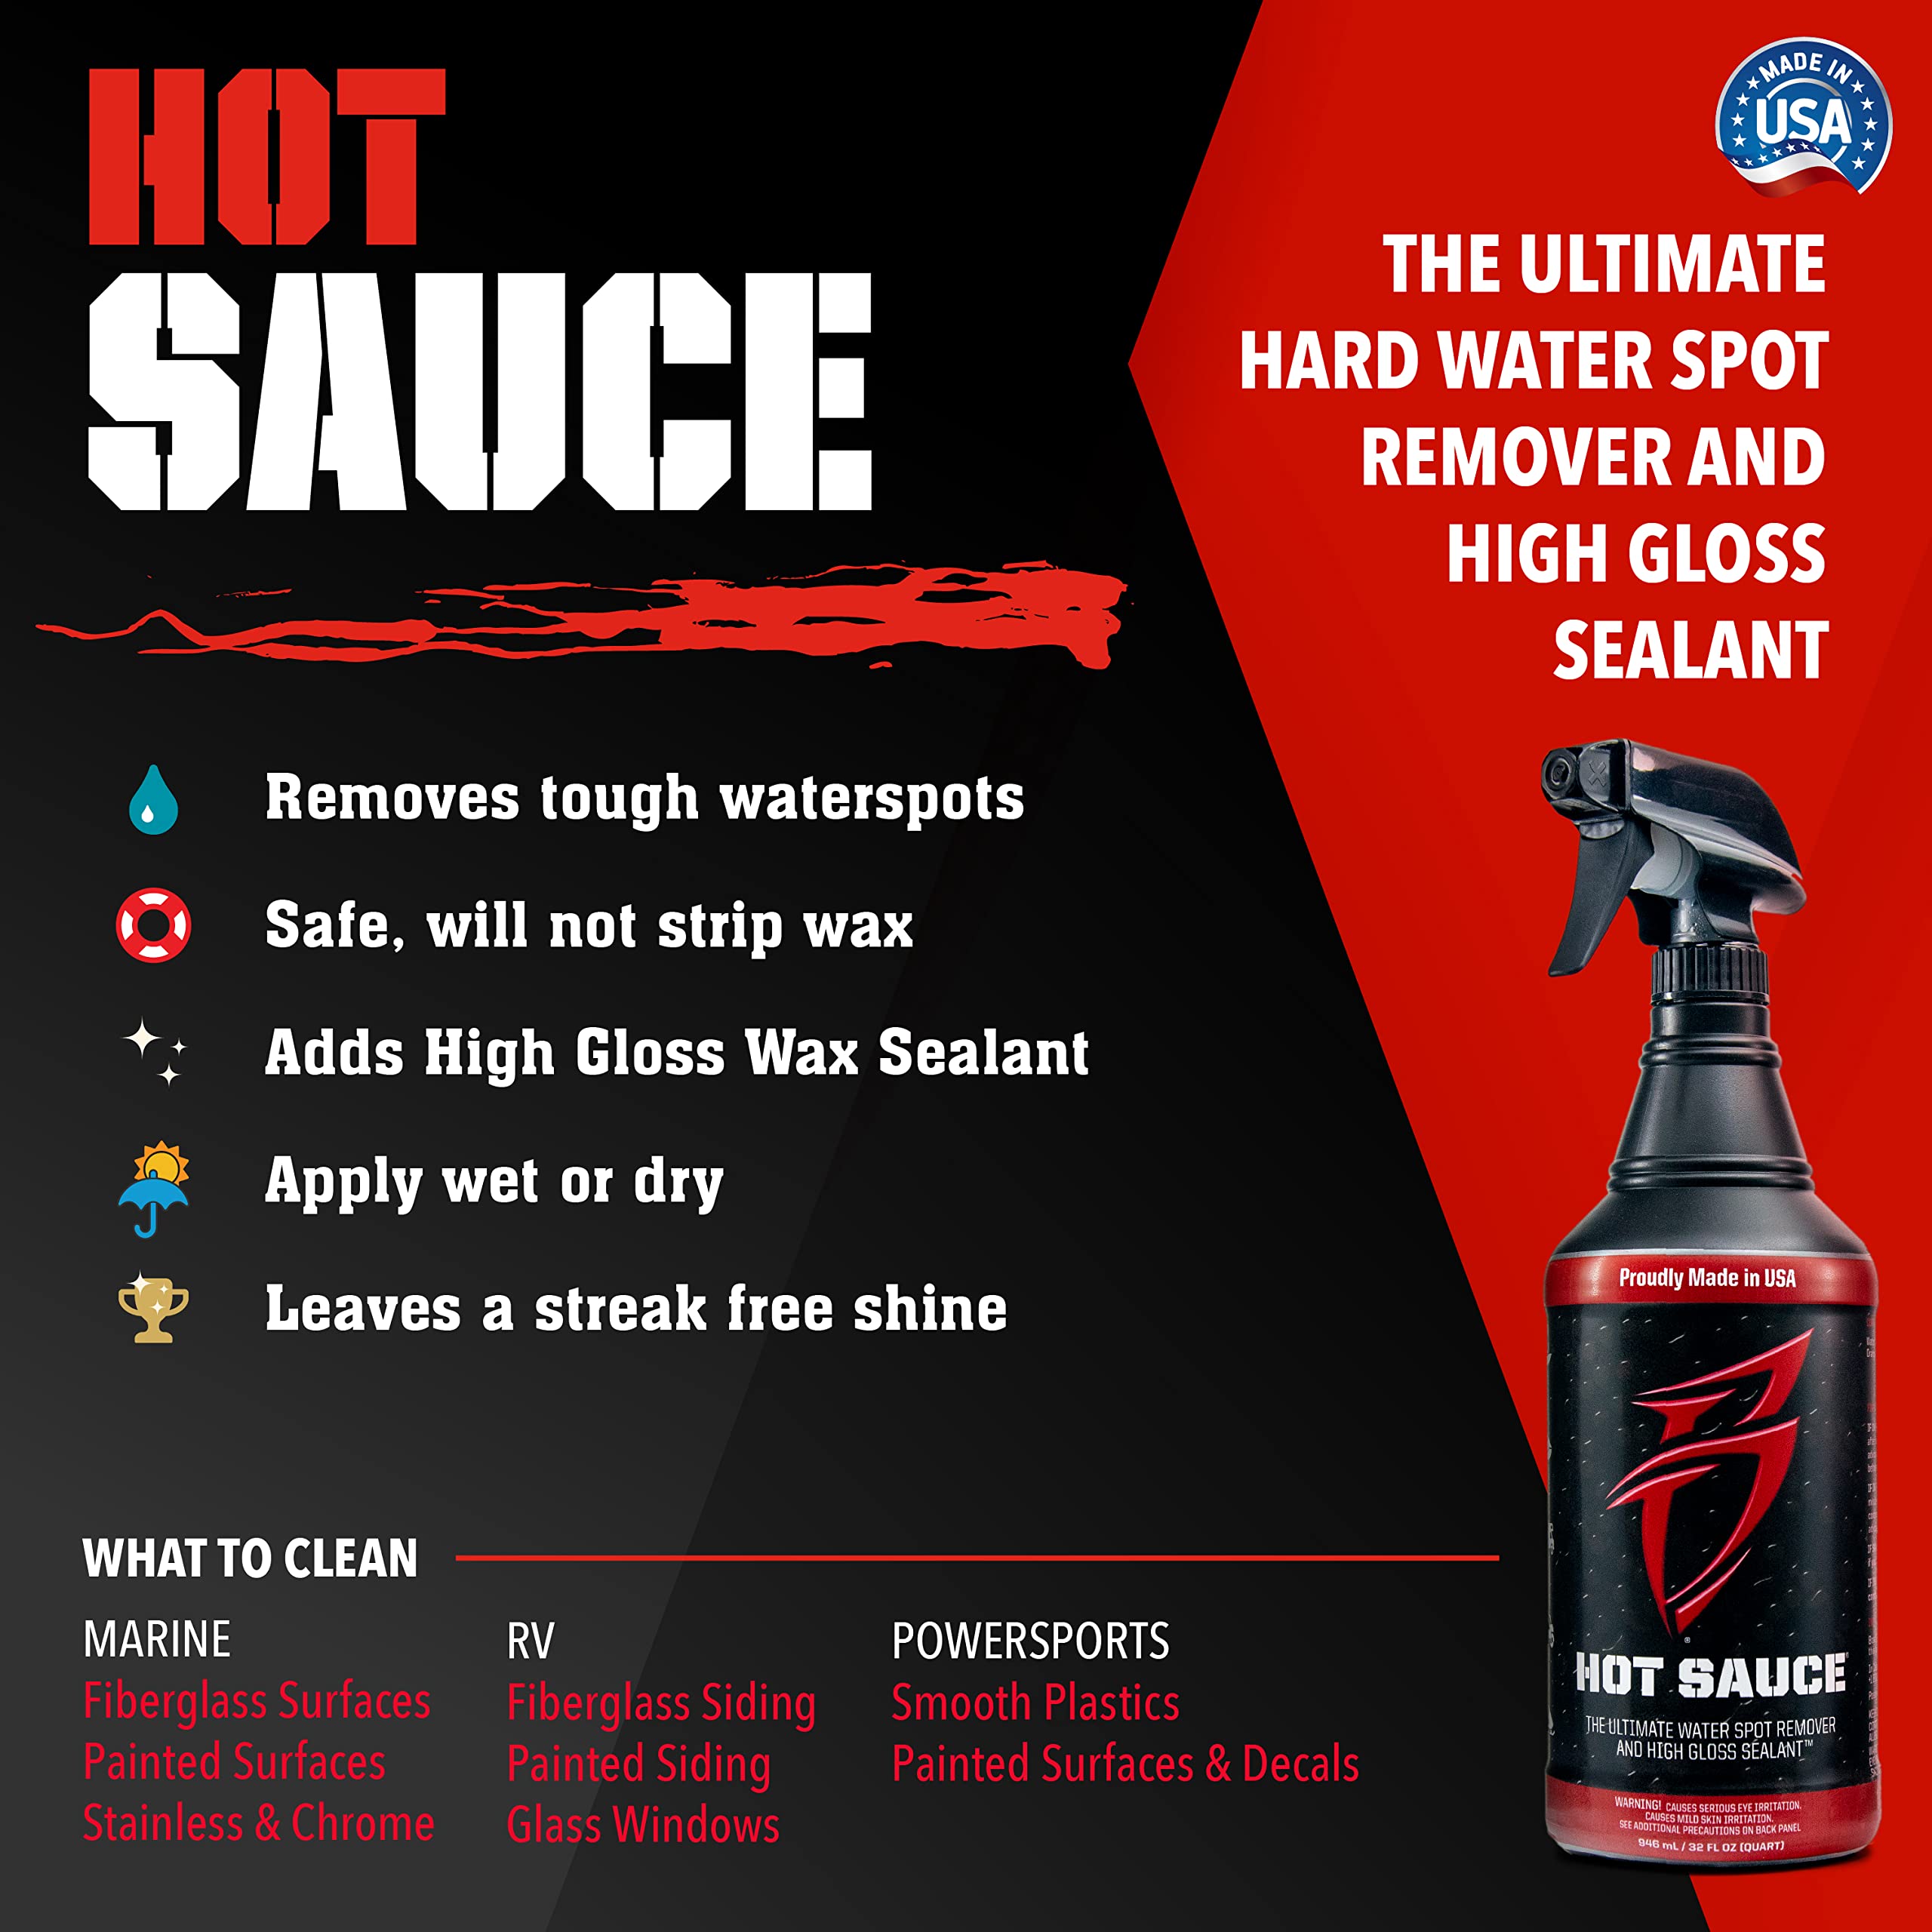 Boat Bling HS-0128 Hot Sauce Hard Water Spot Remover, Gallon Refill, for Boats, RVs, Powersport Vehicles and More, Black,1 Gallon